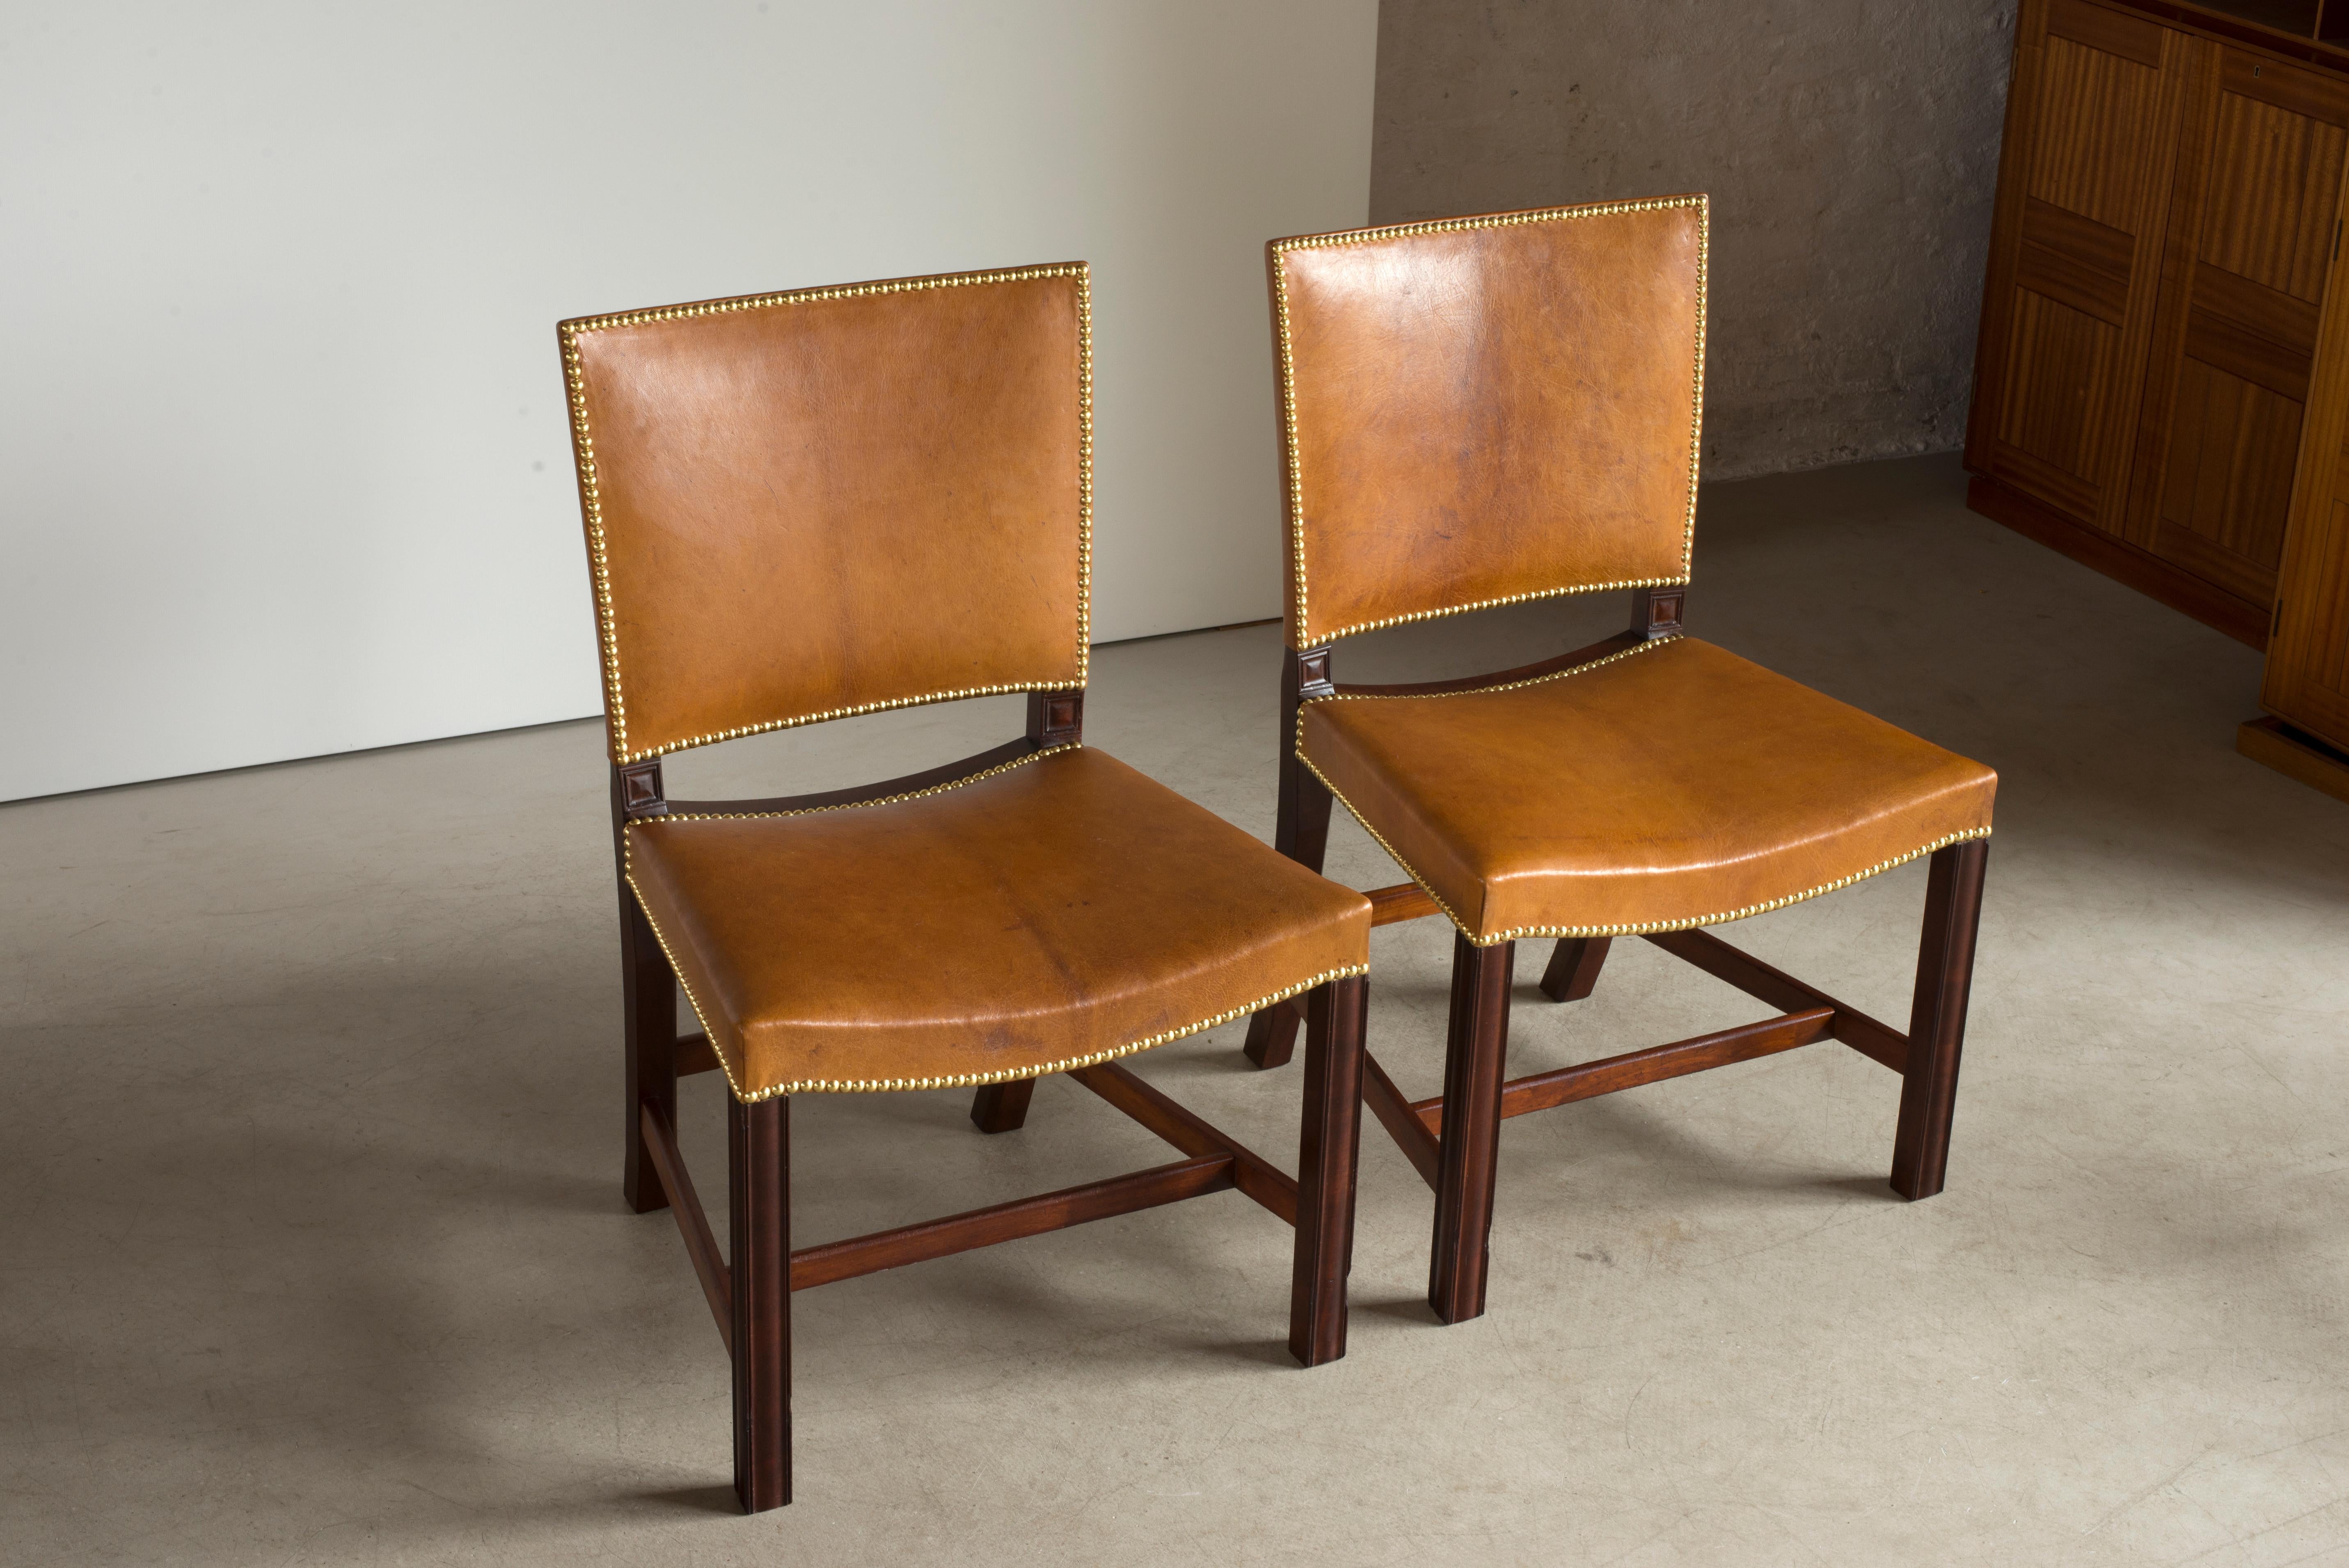 Polished Kaare Klint Red Chairs of Cuban Mahogany and Niger Leather